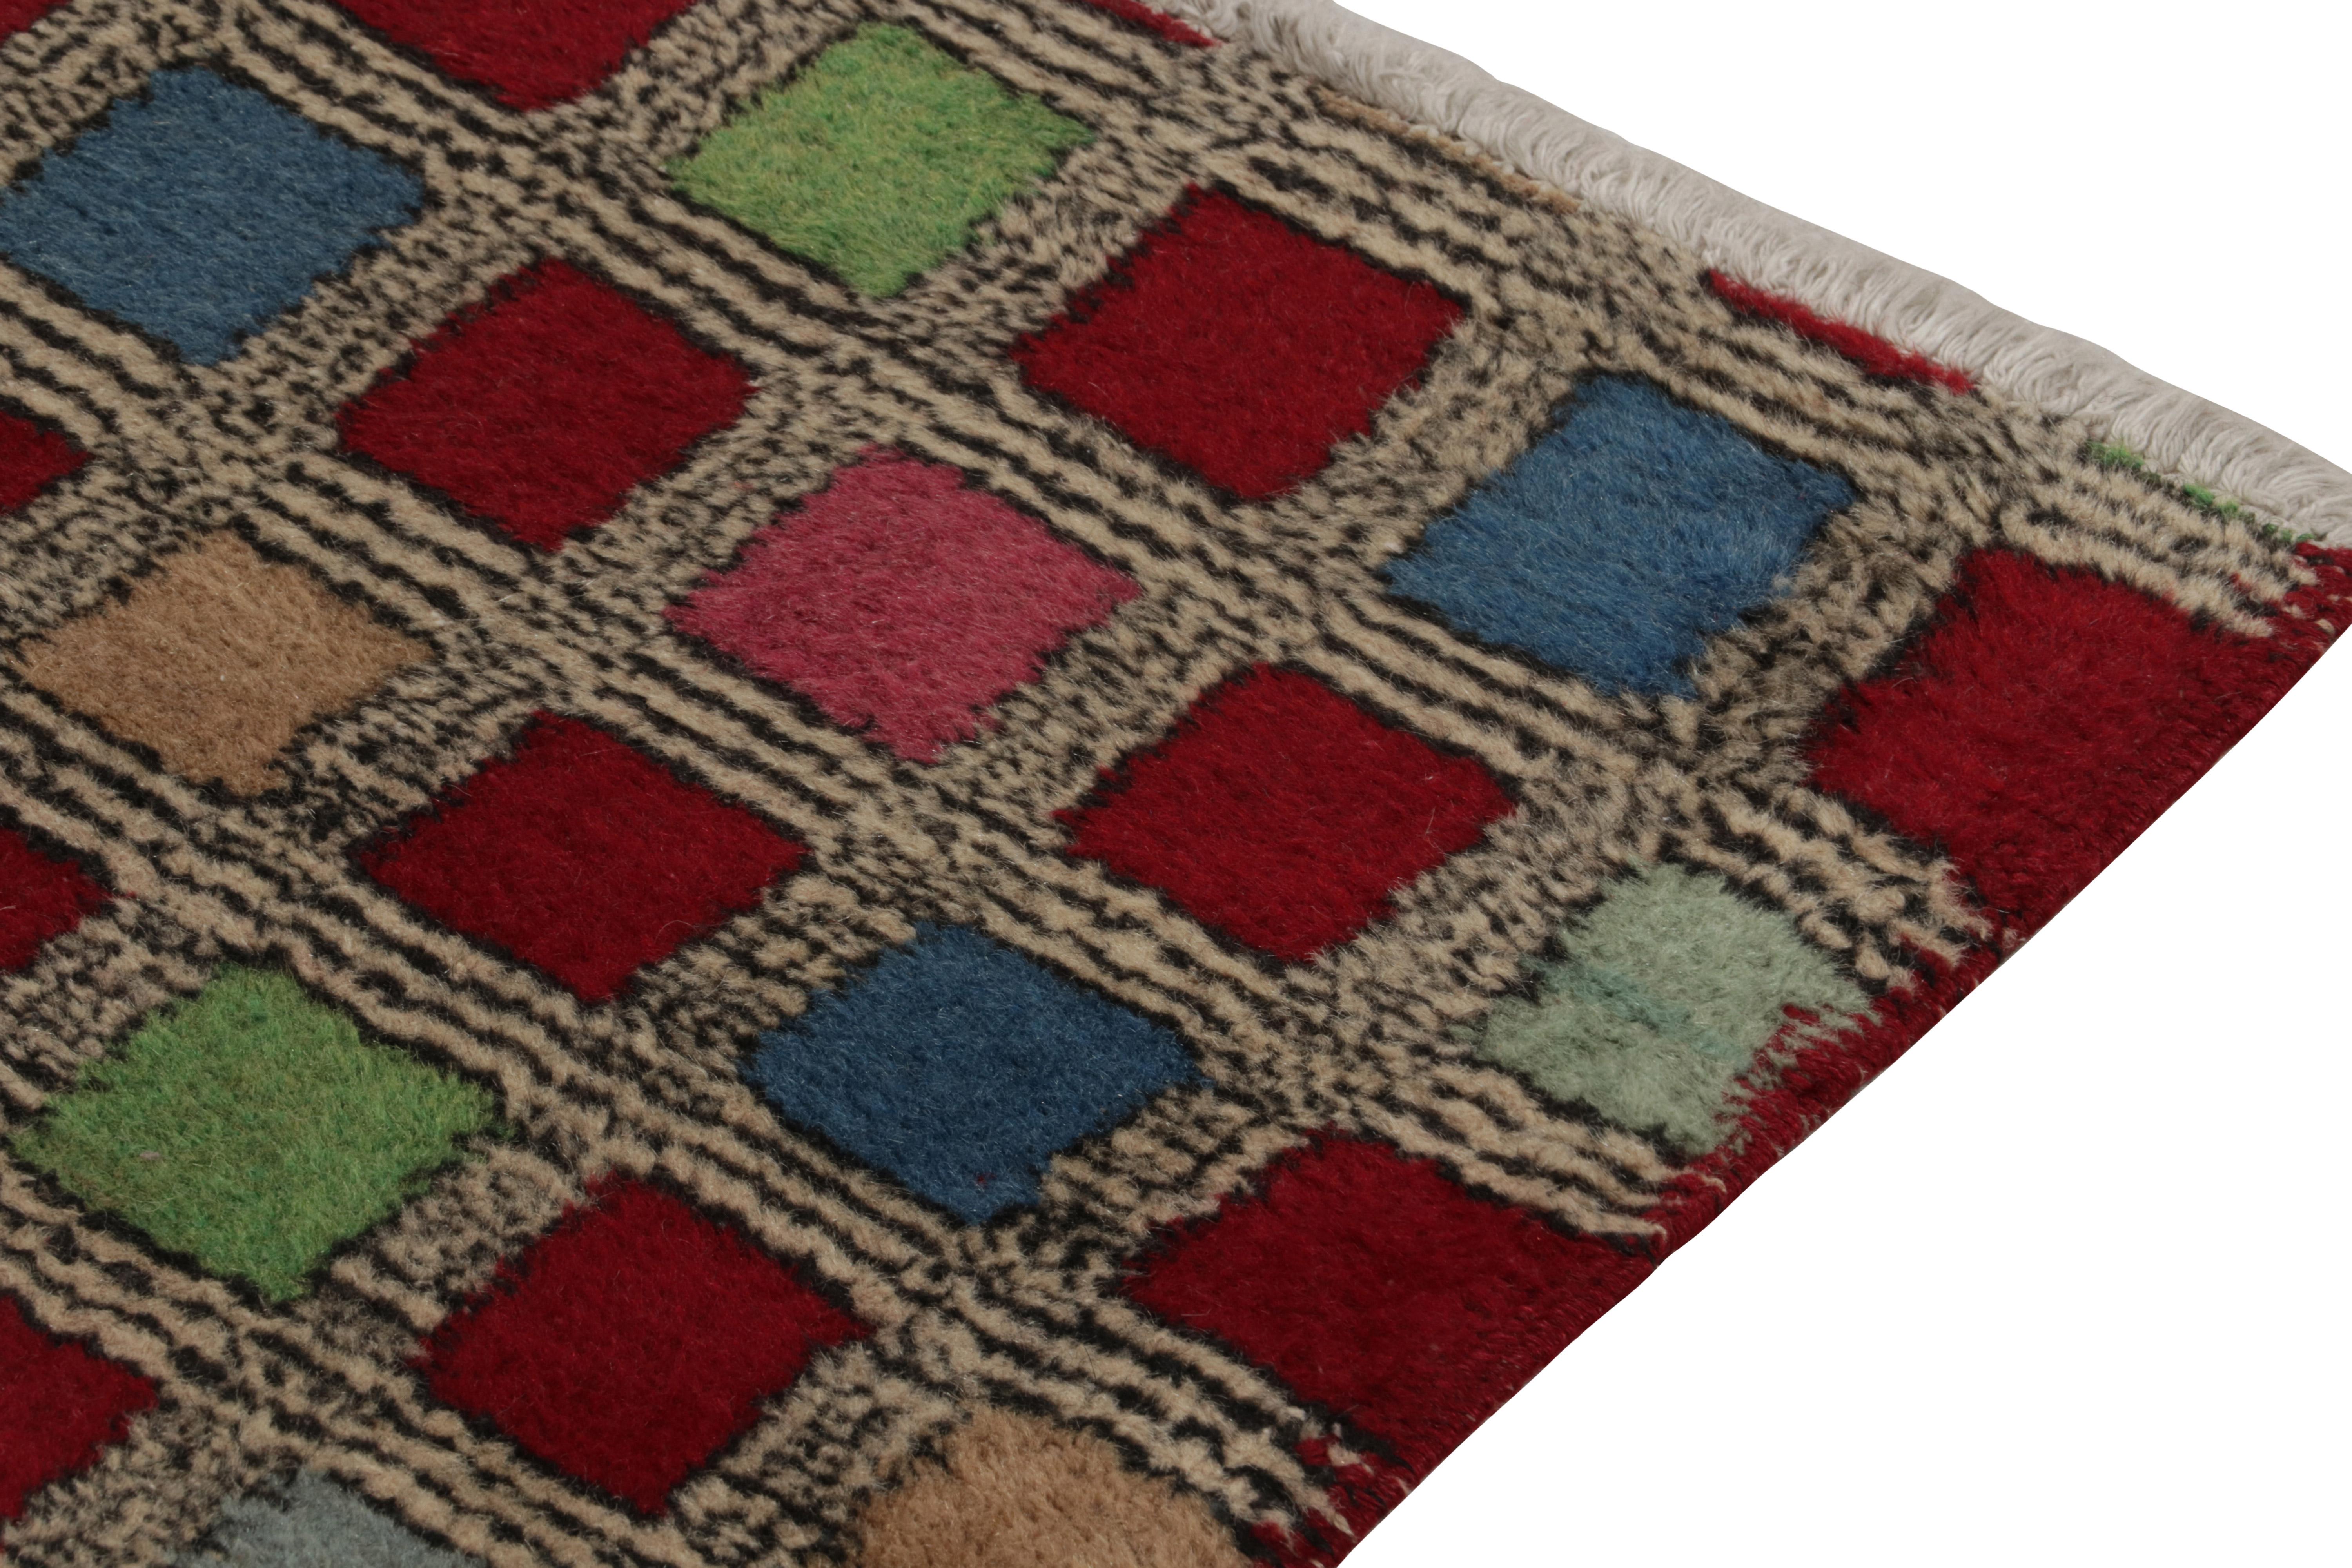 1960s Vintage Mid-Century Runner in Multicolor Geometric Patterns by Rug & Kilim In Good Condition For Sale In Long Island City, NY